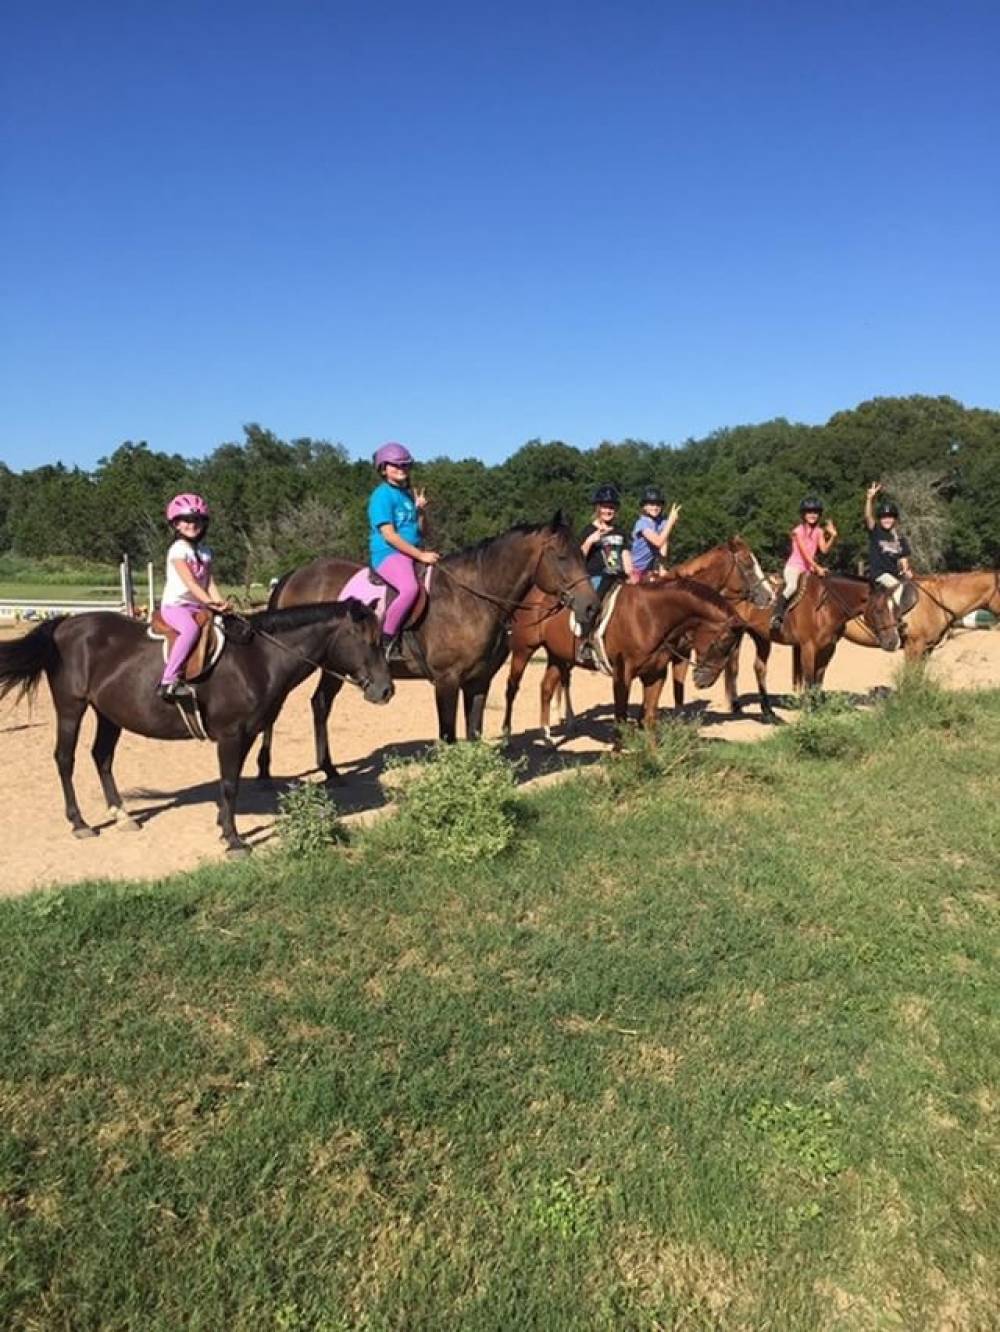 TOP TEXAS SLEEPAWAY CAMP: Hunters Chase Farms Inc. is a Top Sleepaway Summer Camp located in Wimberley Texas offering many fun and enriching Sleepaway and other camp programs. Hunters Chase Farms Inc. also offers CIT/LIT and/or Teen Leadership Opportunities, too.